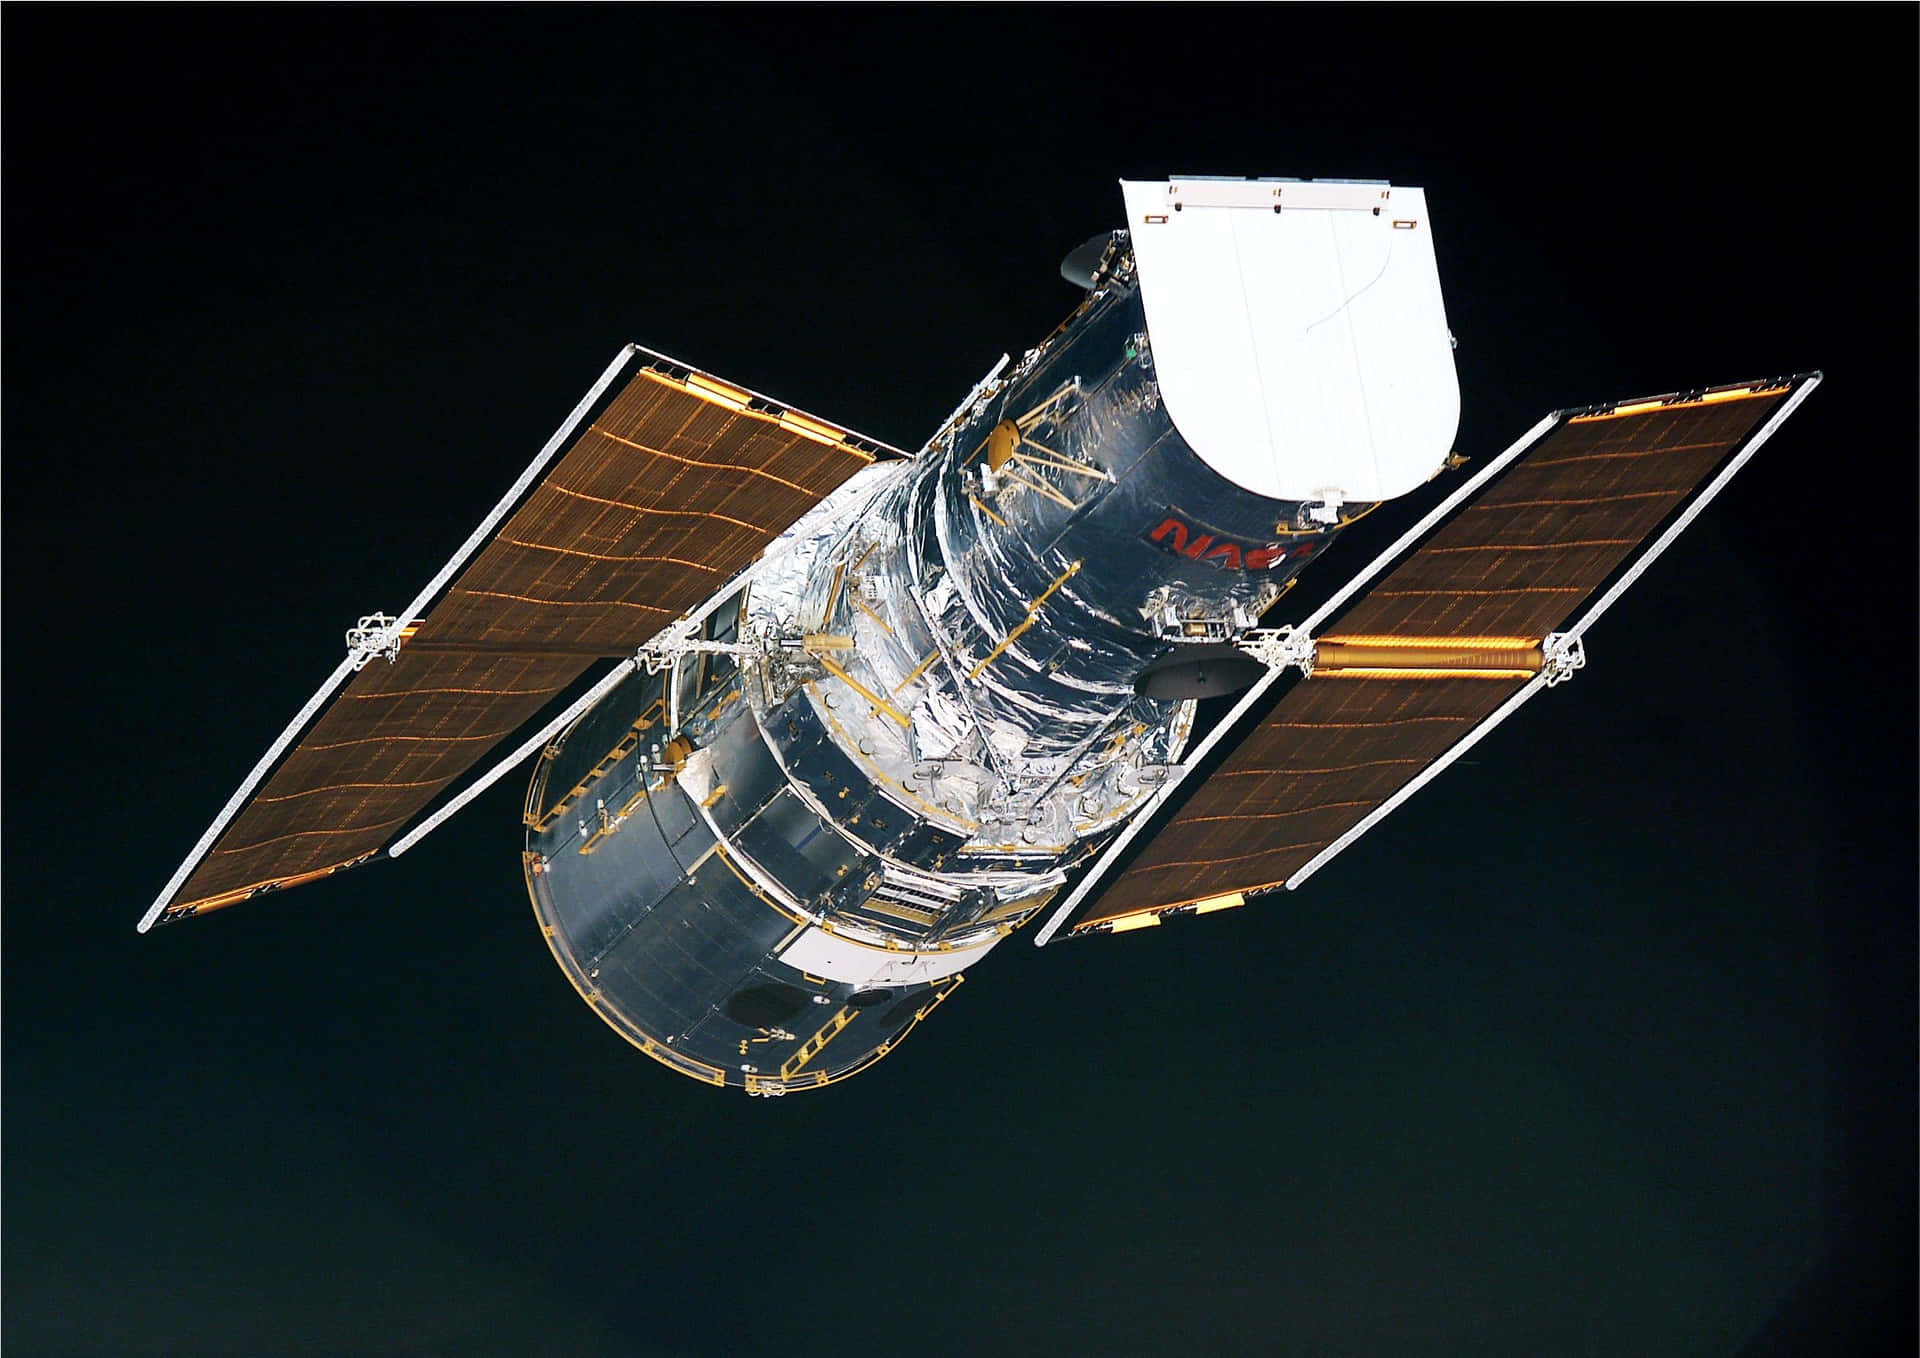 Majestic Hubble Space Telescope capturing the wonders of the universe. Wallpaper